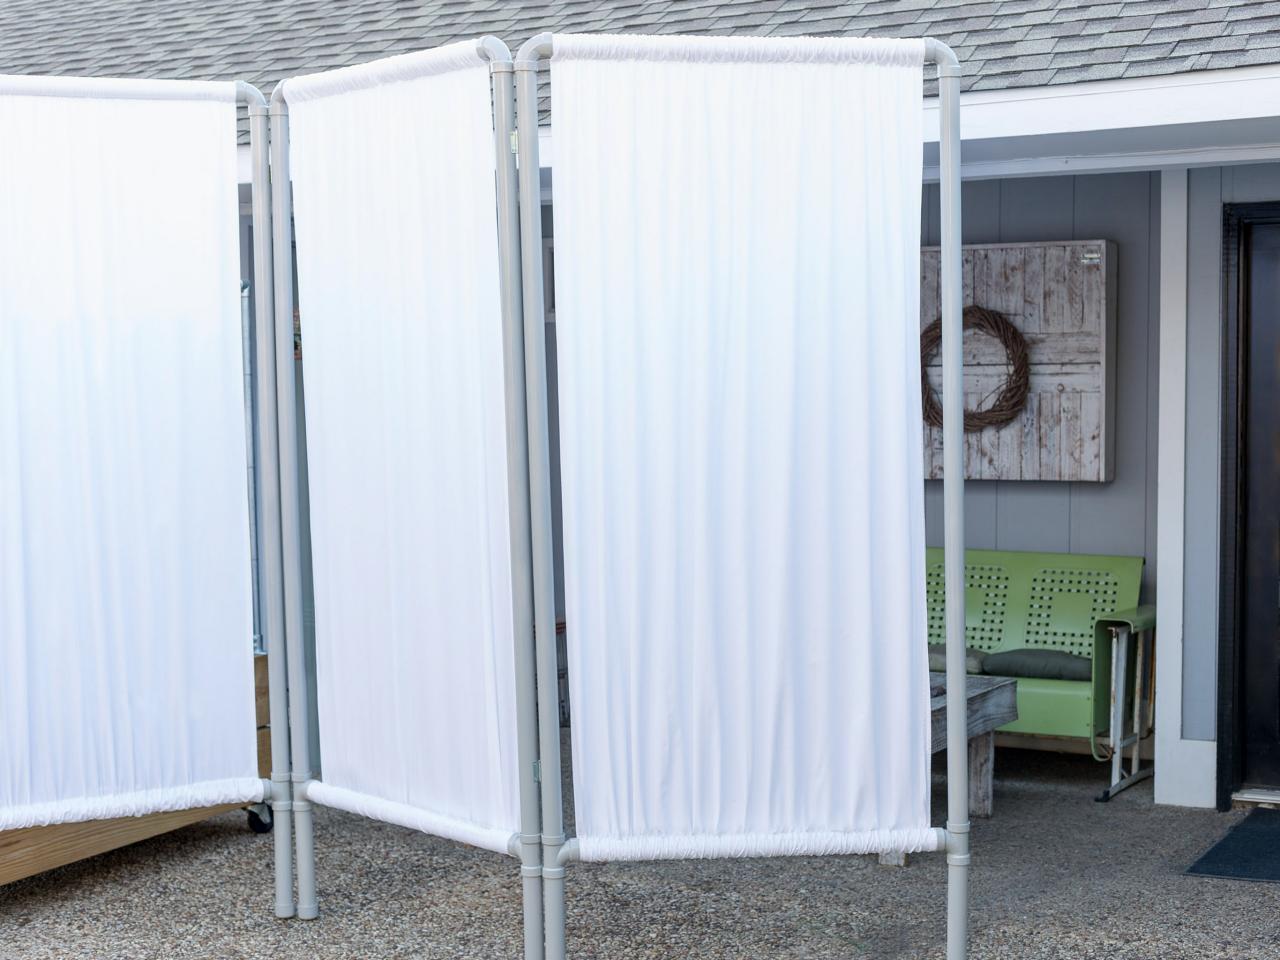 Outdoor Privacy Screen From Pvc Pipe, How To Make A Folding Outdoor Privacy Screen